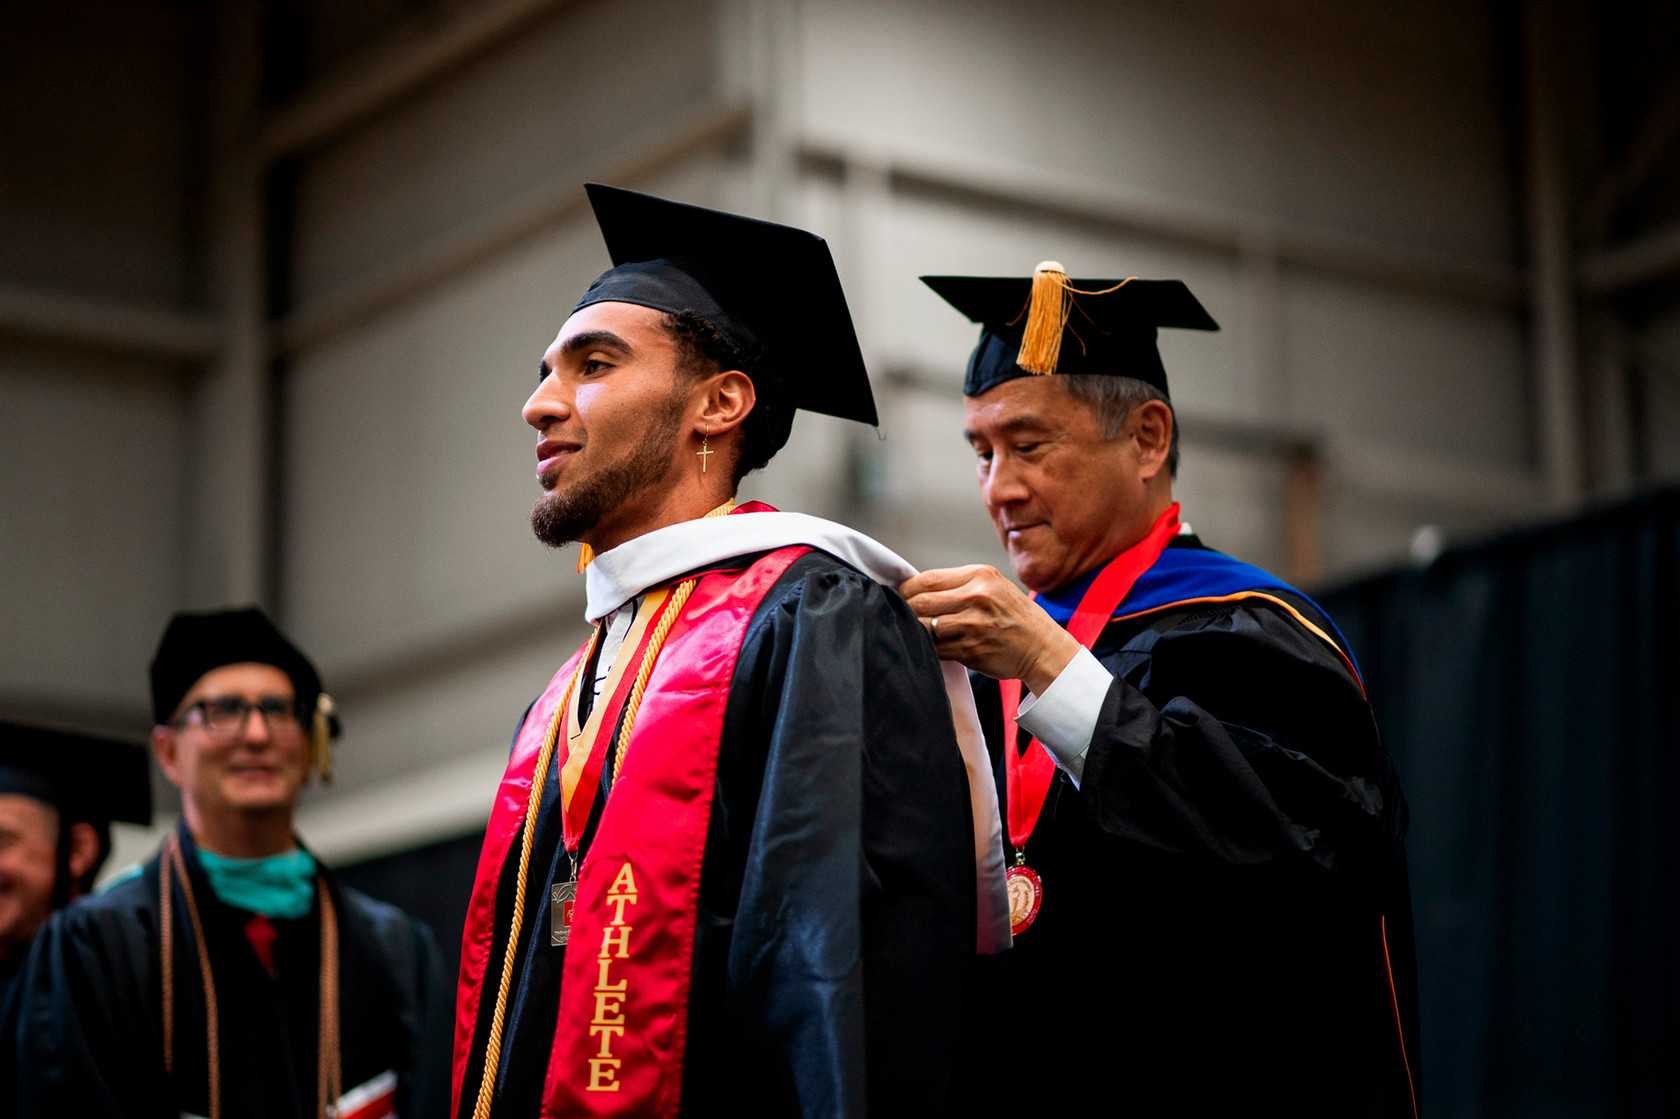 Graduate in cap and gown at commencement ceremony